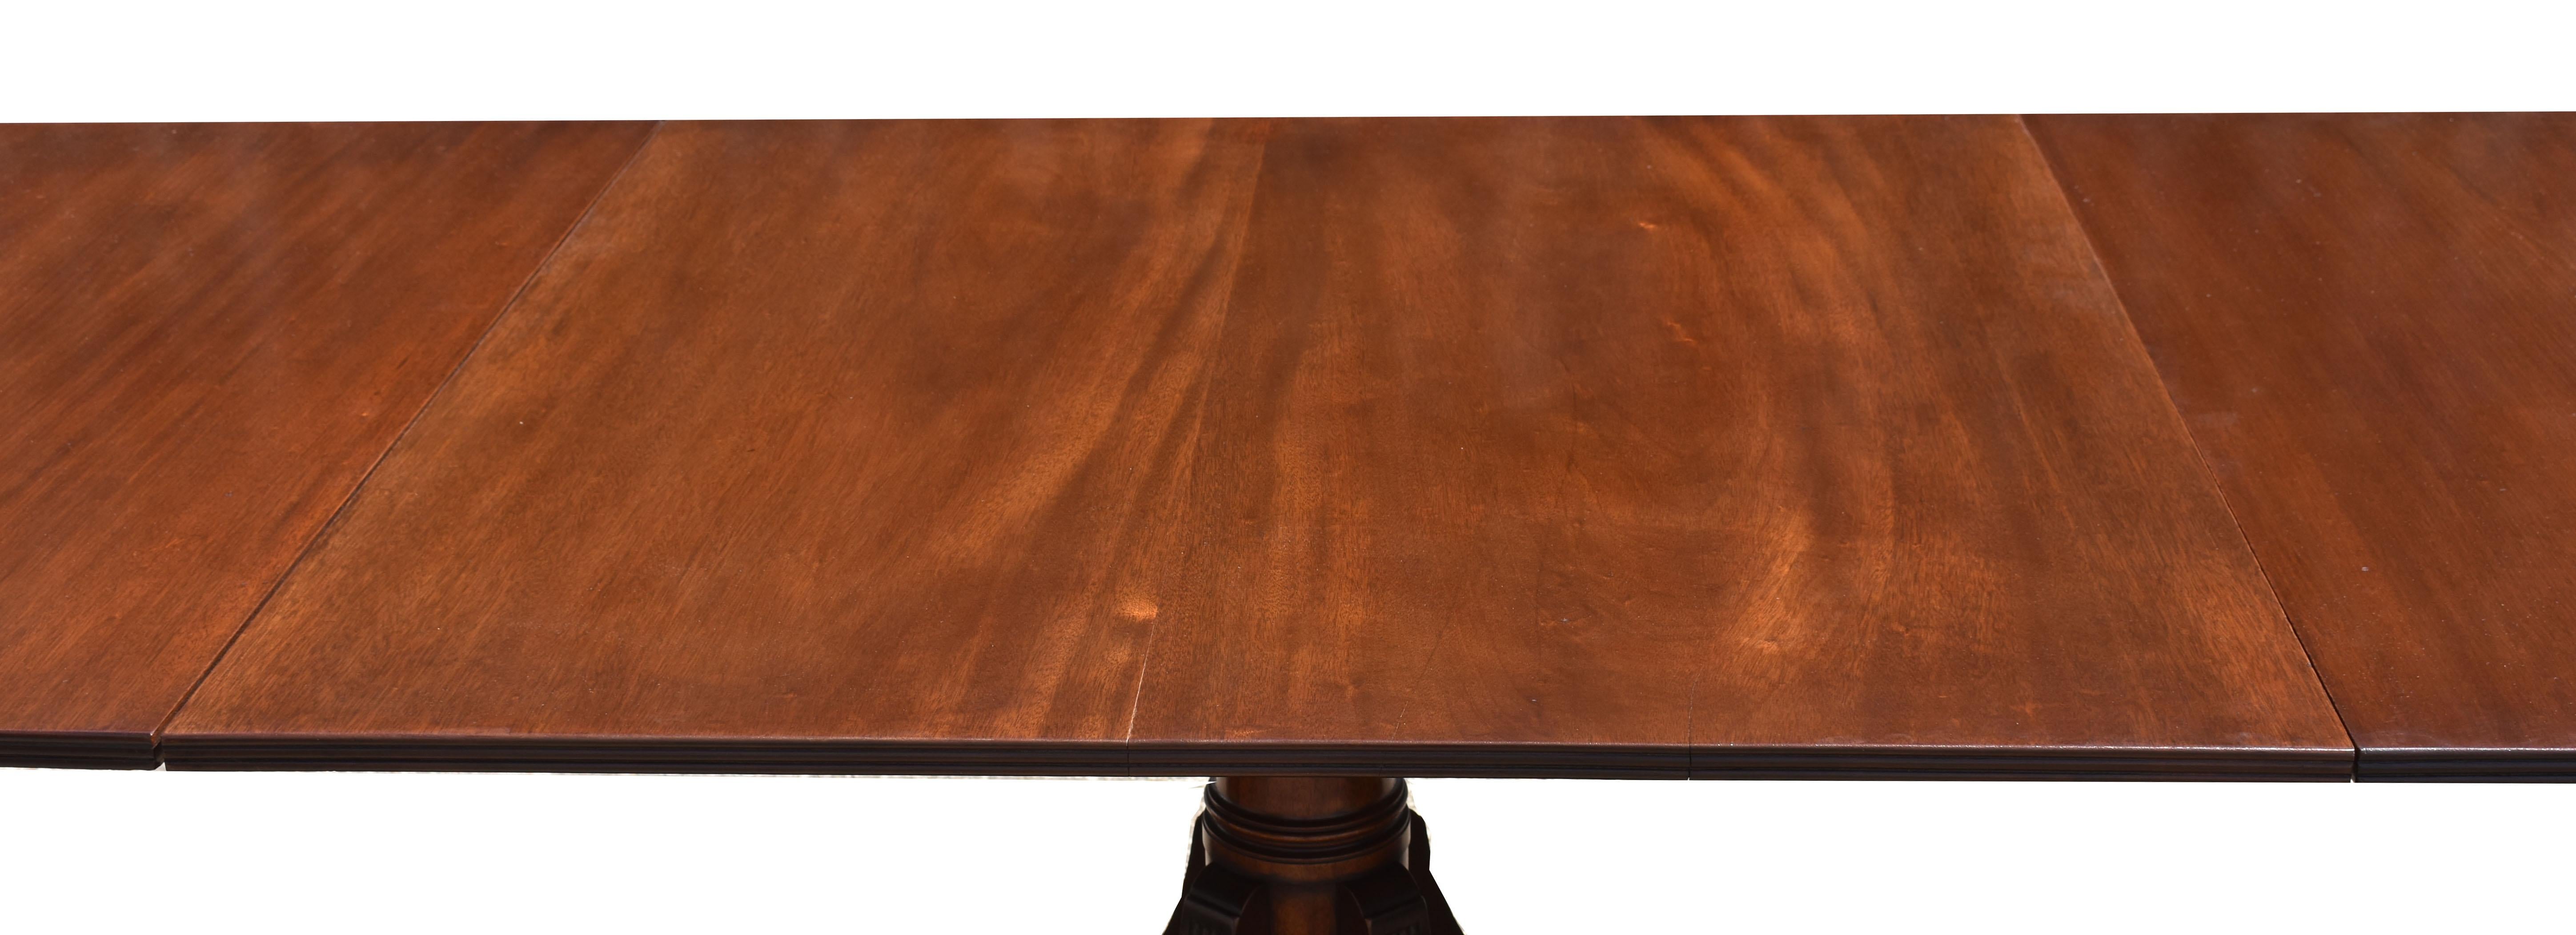 20th Century English Antique Regency Style Solid Mahogany Pedestal Dining Table 1